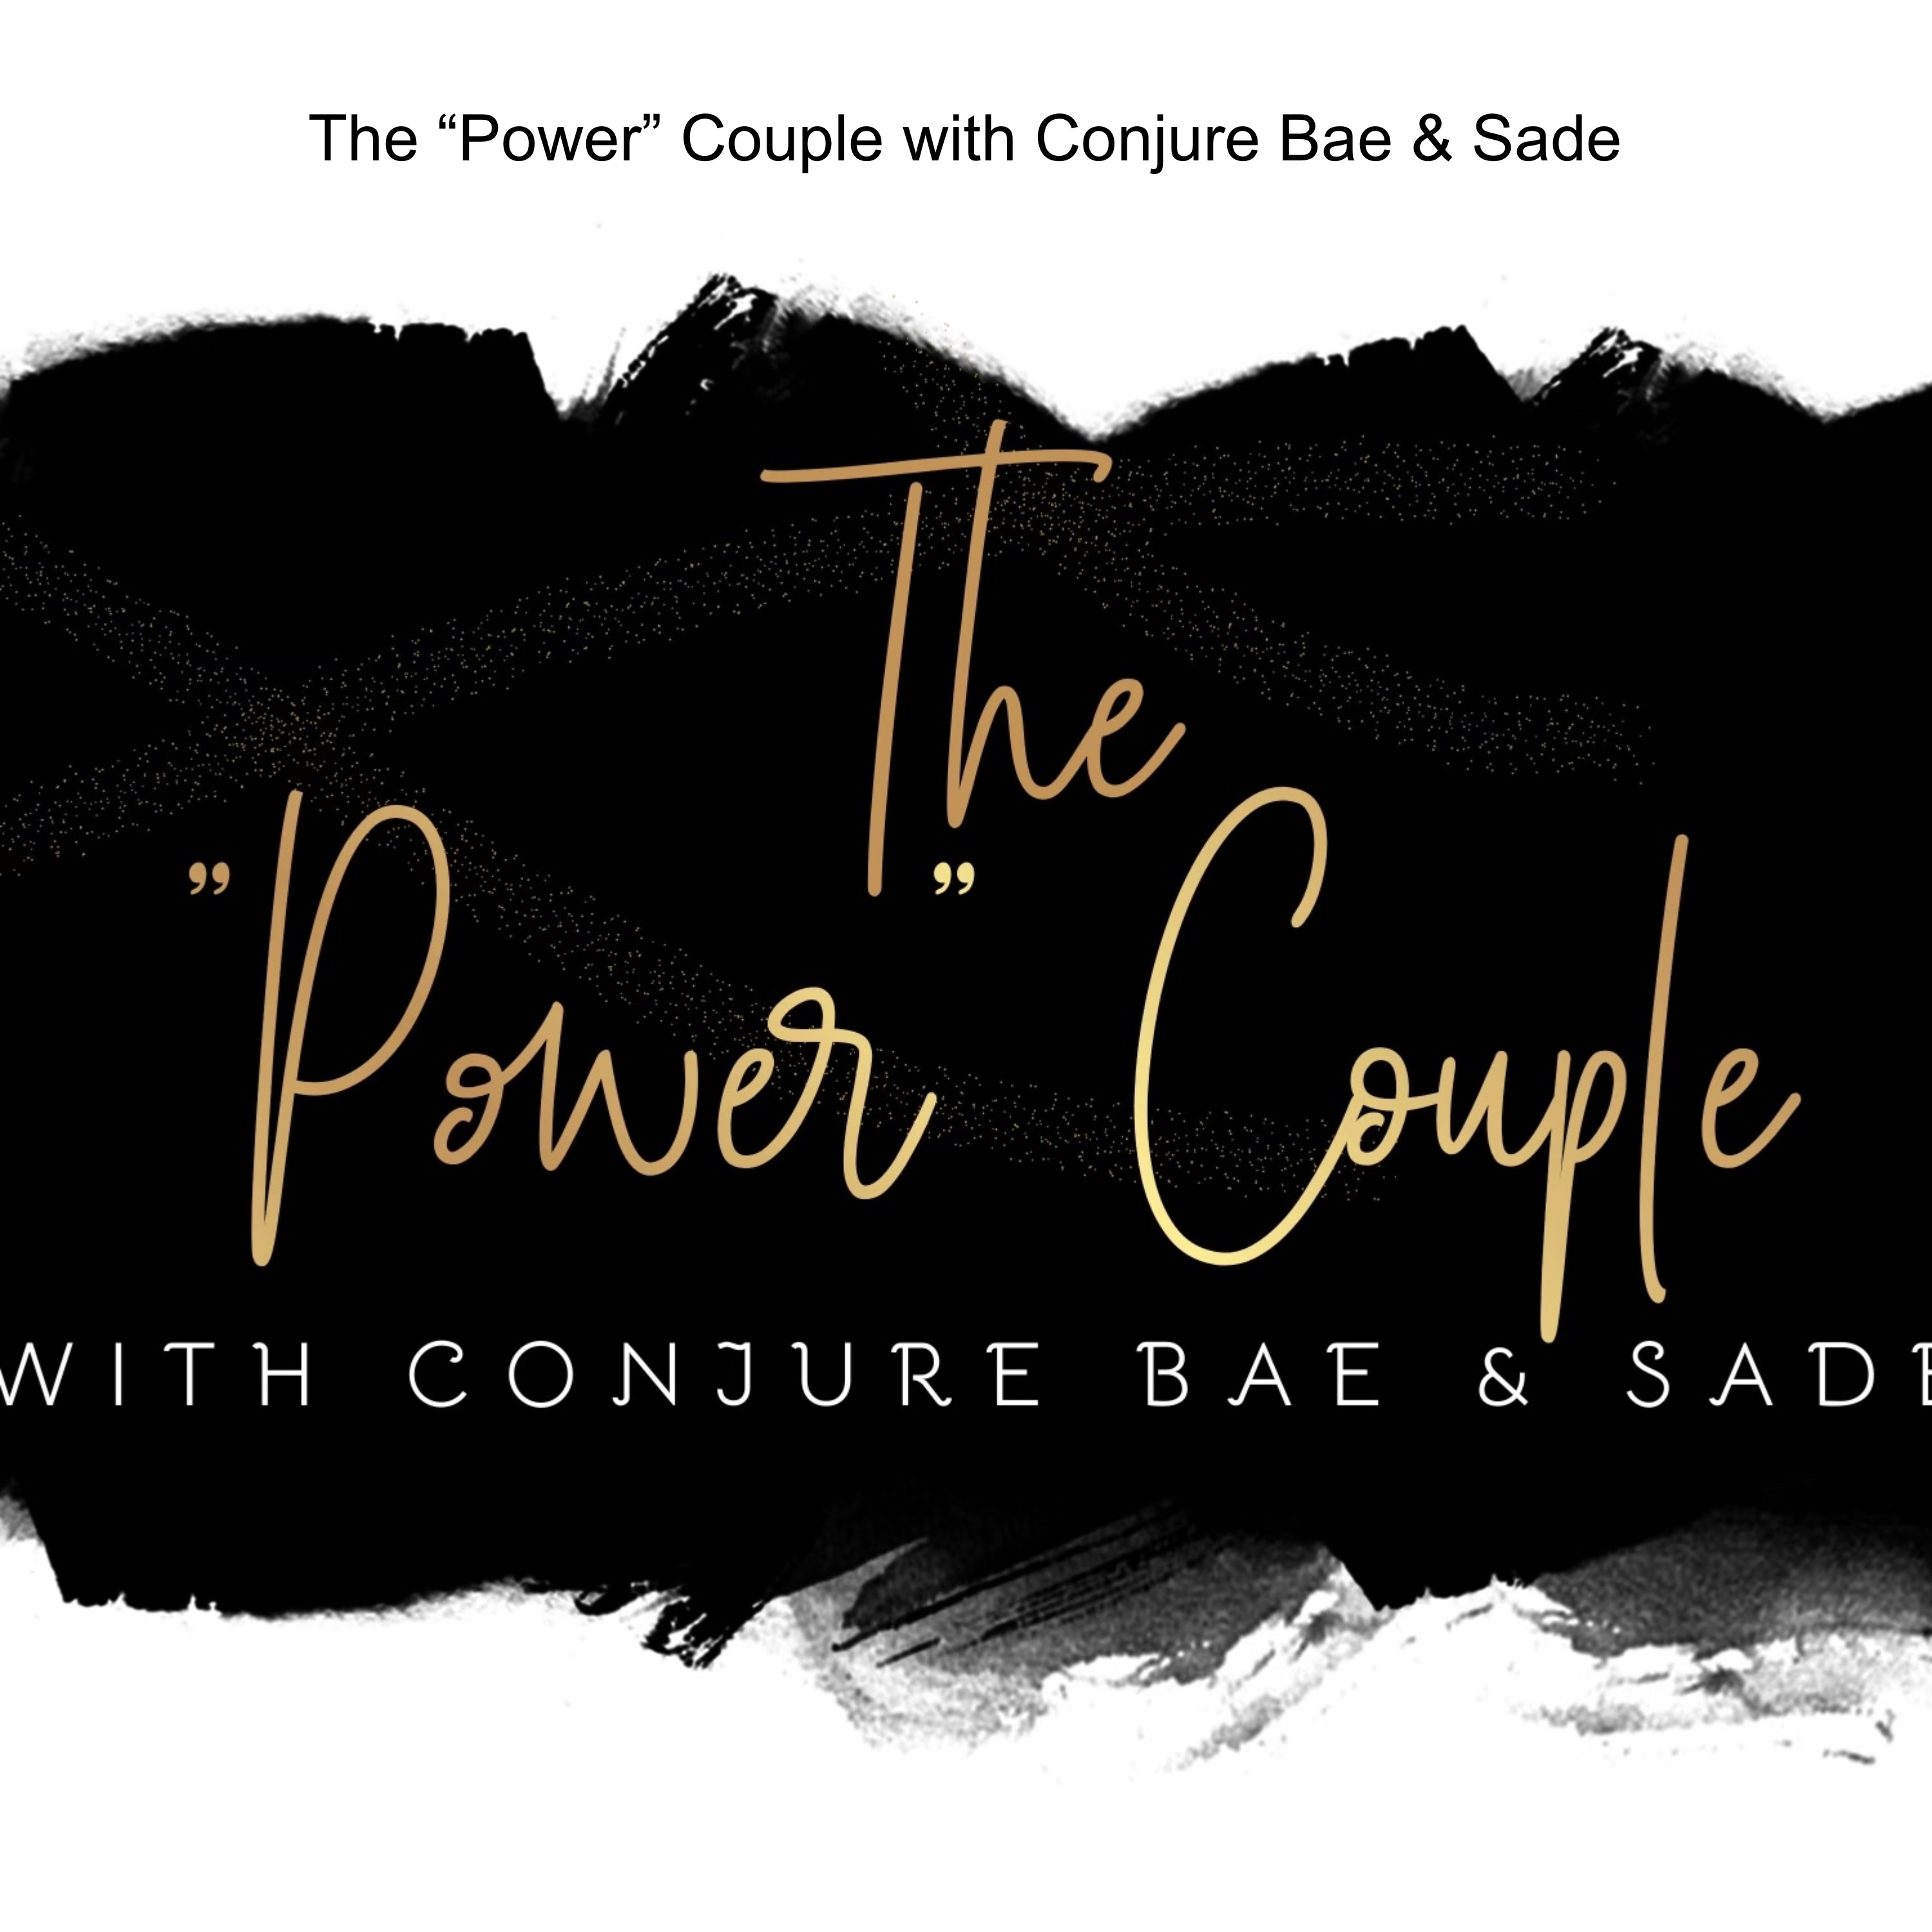 The “Power” Couple with Conjure Bae & Sade